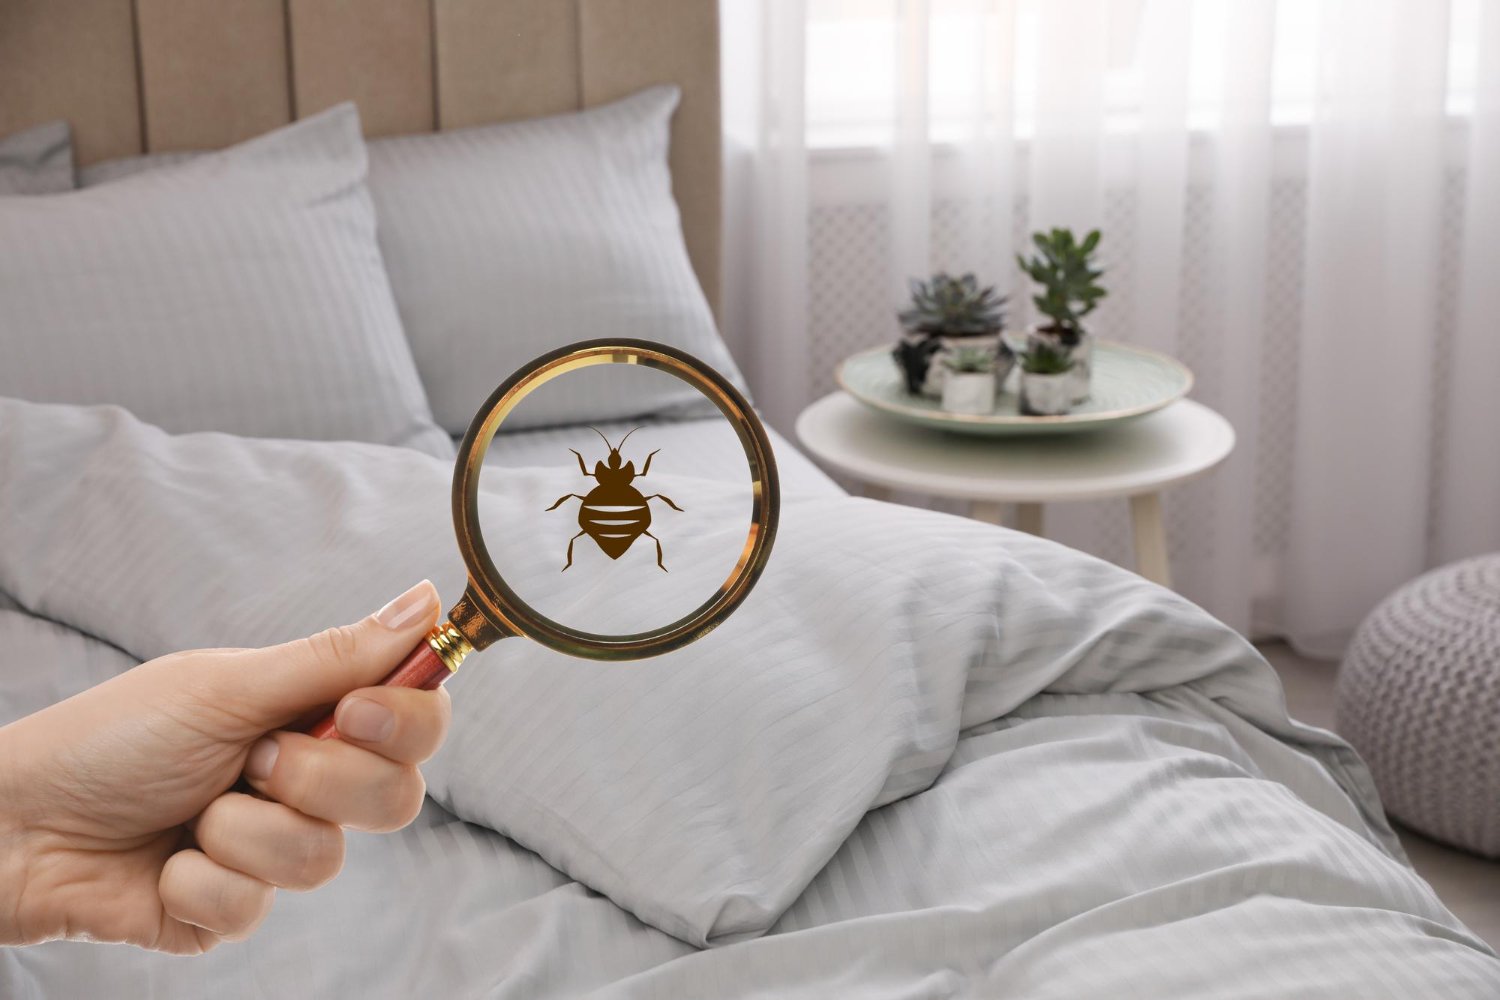 Bed Bug-Proofing Your Home